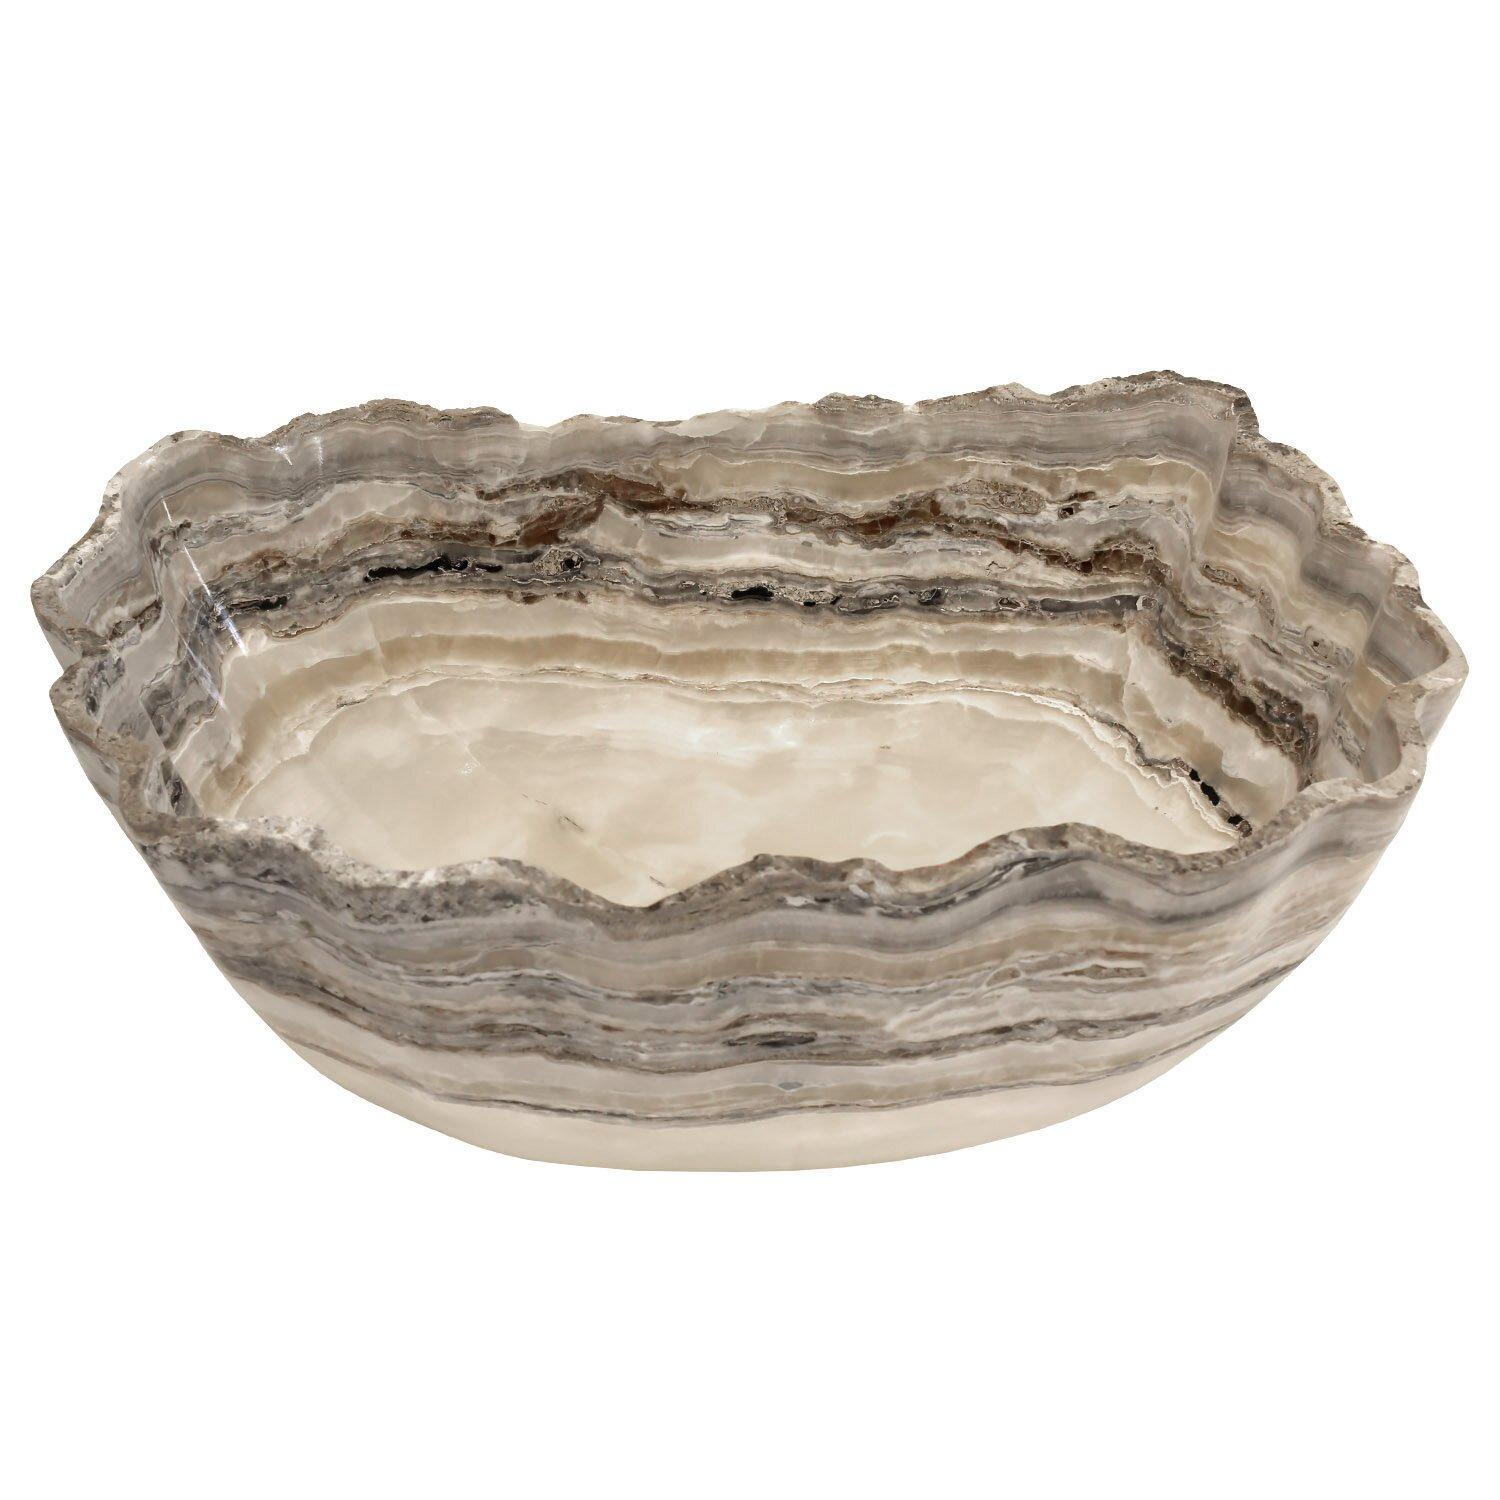 Handmade in Mexico
Carved from a single piece of onyx
One of a kind
Dimensions: 17 x 13.5 x 7 D in. / 43 x 34 x 18 D cm

A spectacular, organic, undulating vessel of cream transparent stone contrasted with brown and tan layers. The deep bowl is